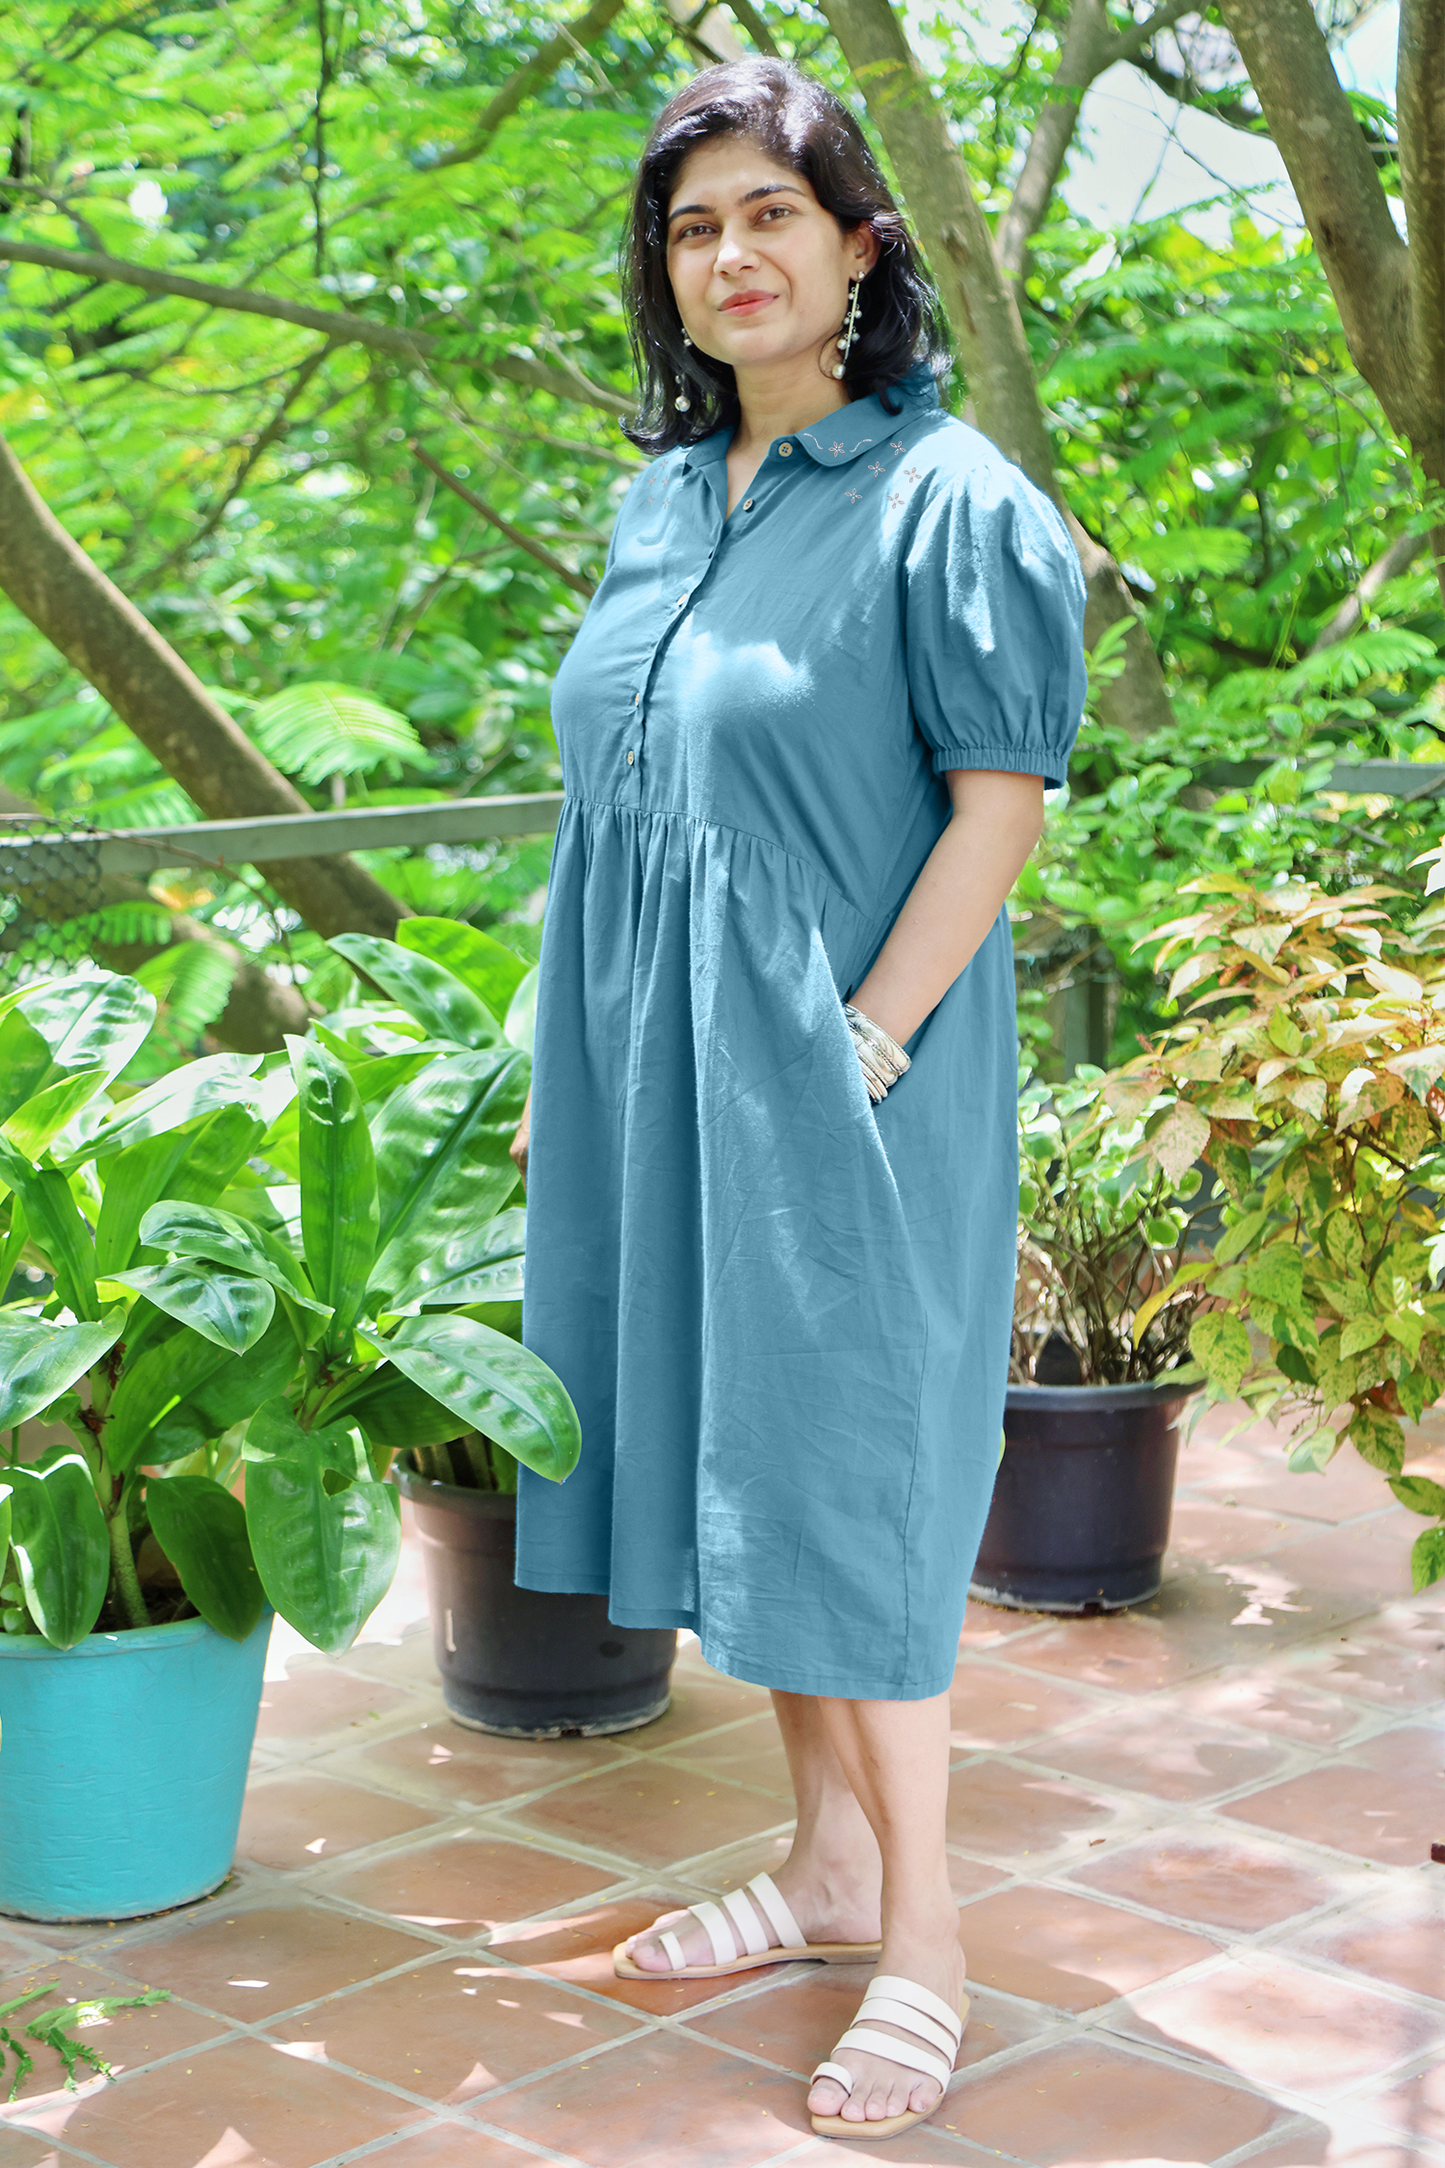 Collared Fine Cotton Teal Blue Dress with Embroidery